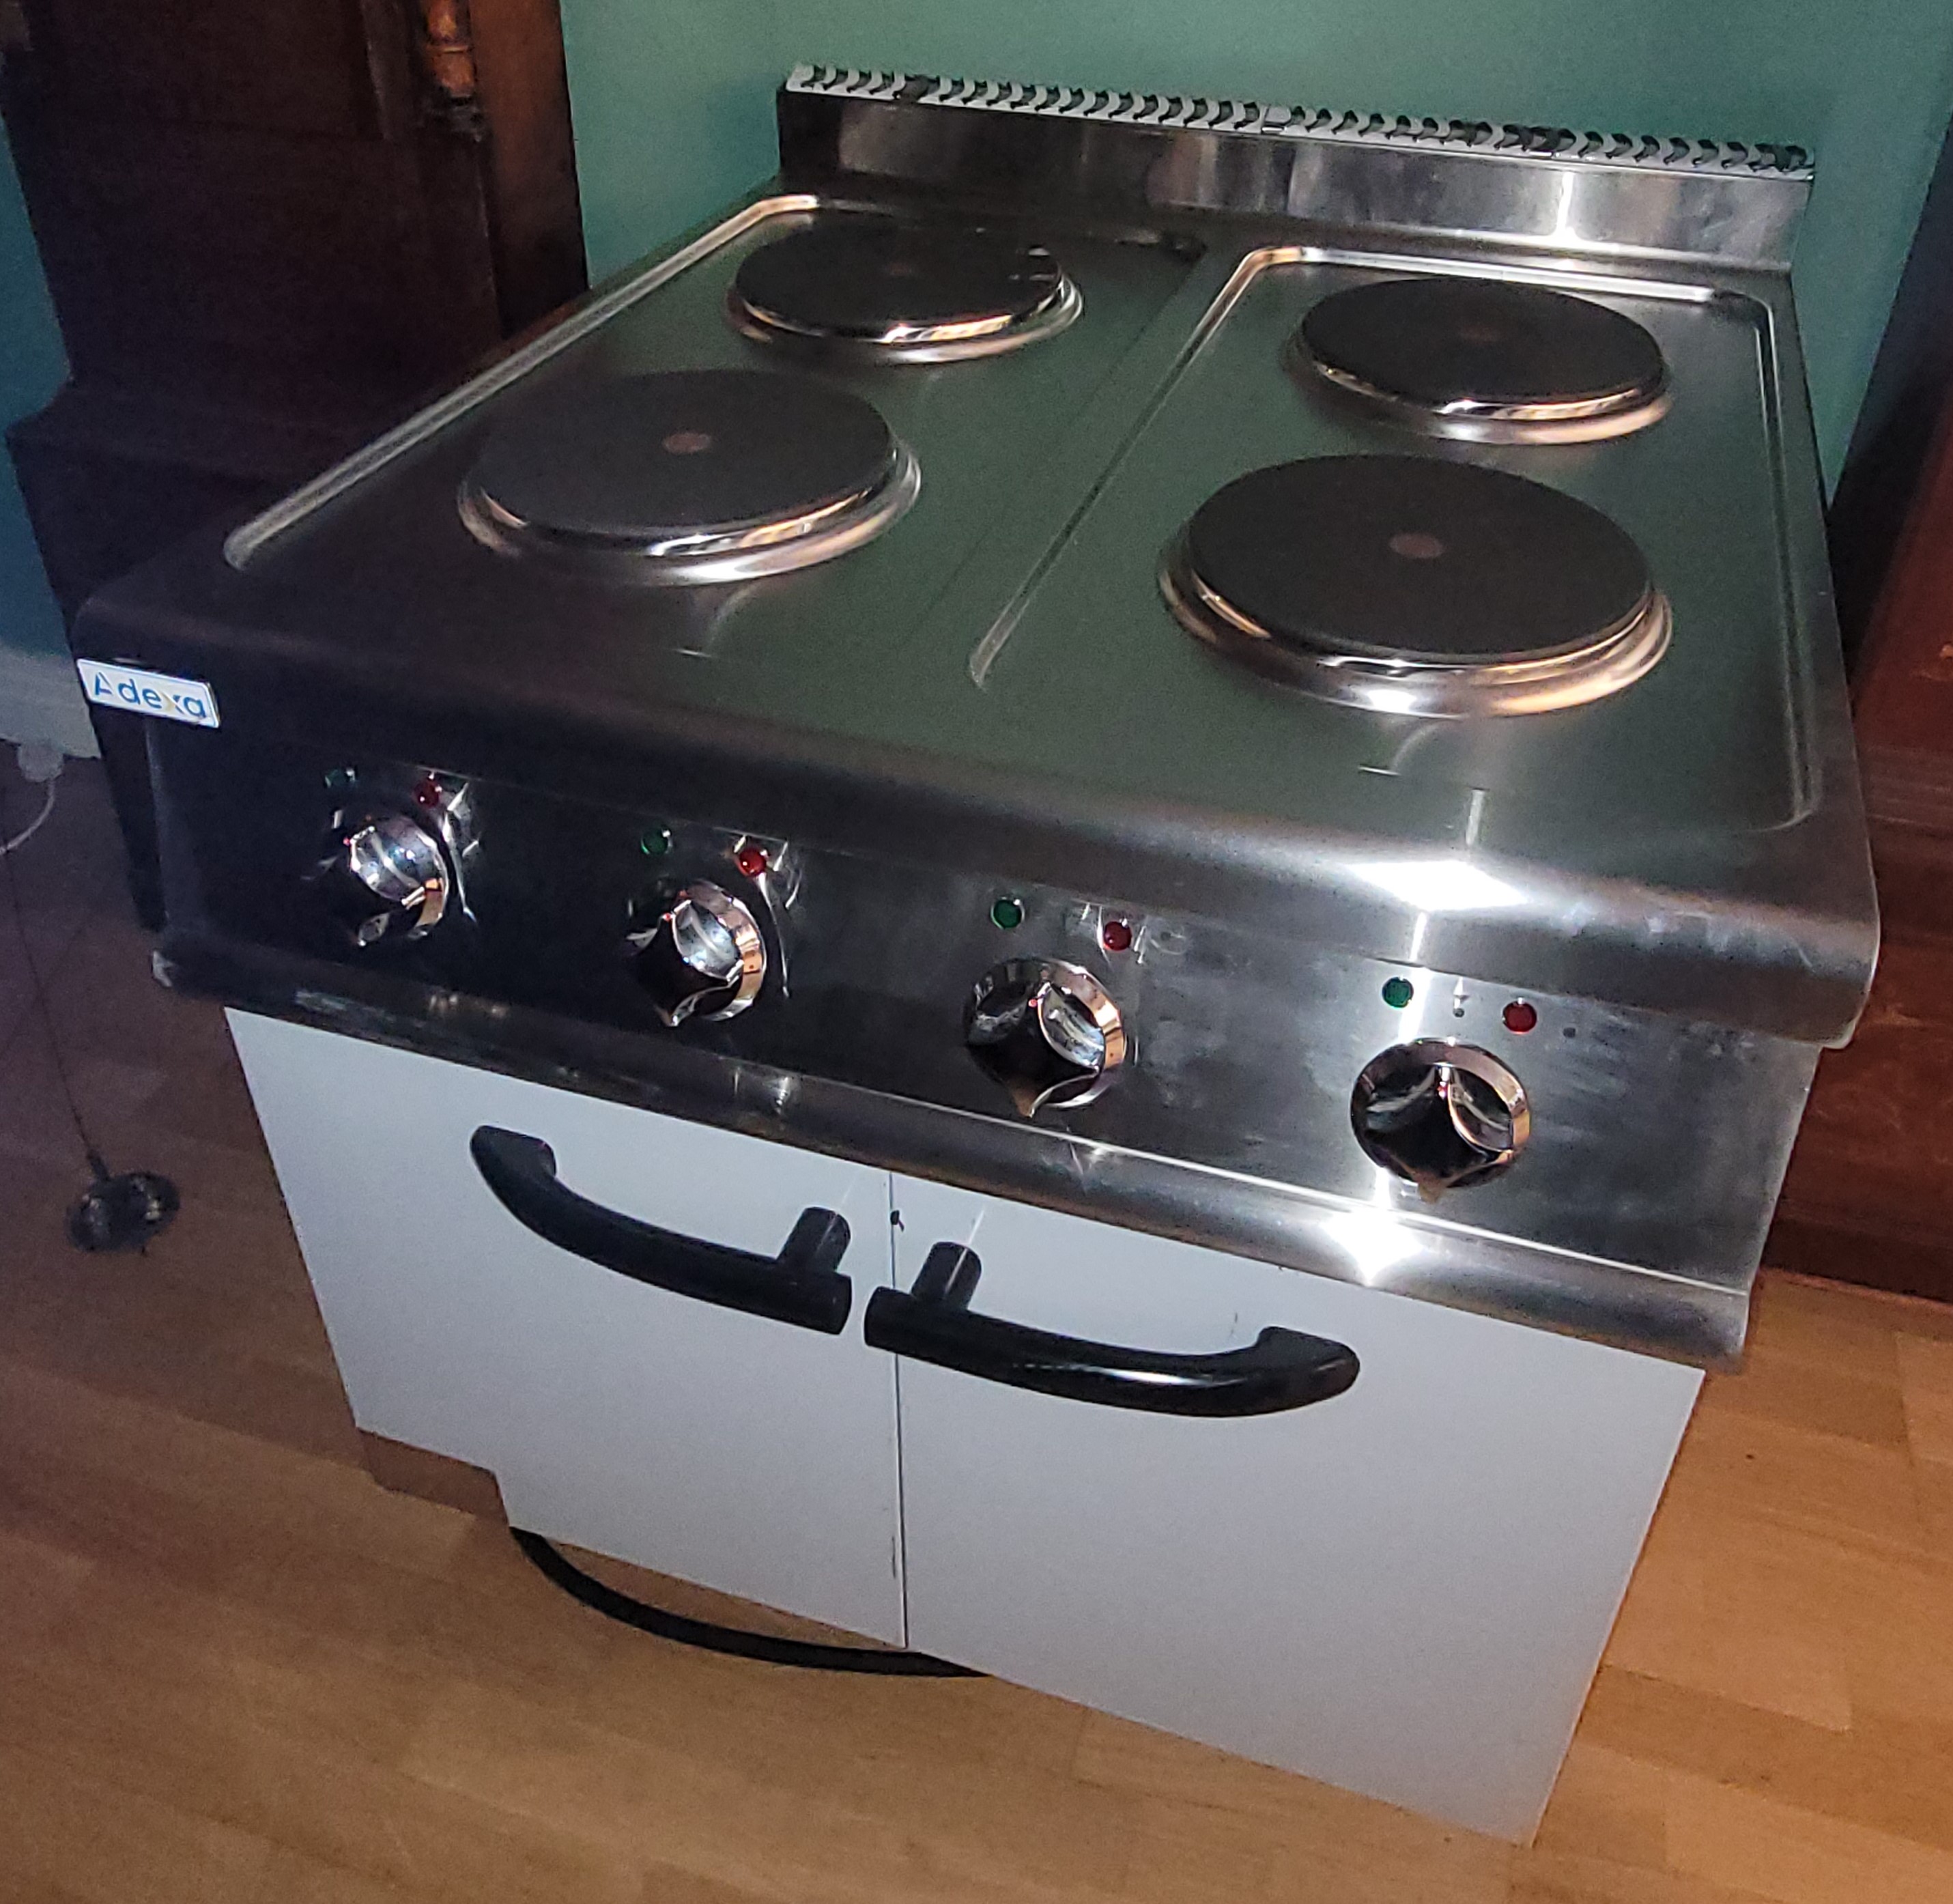 An Adexa industrial three phase electric four burner hob, stainless steel construction, having twin